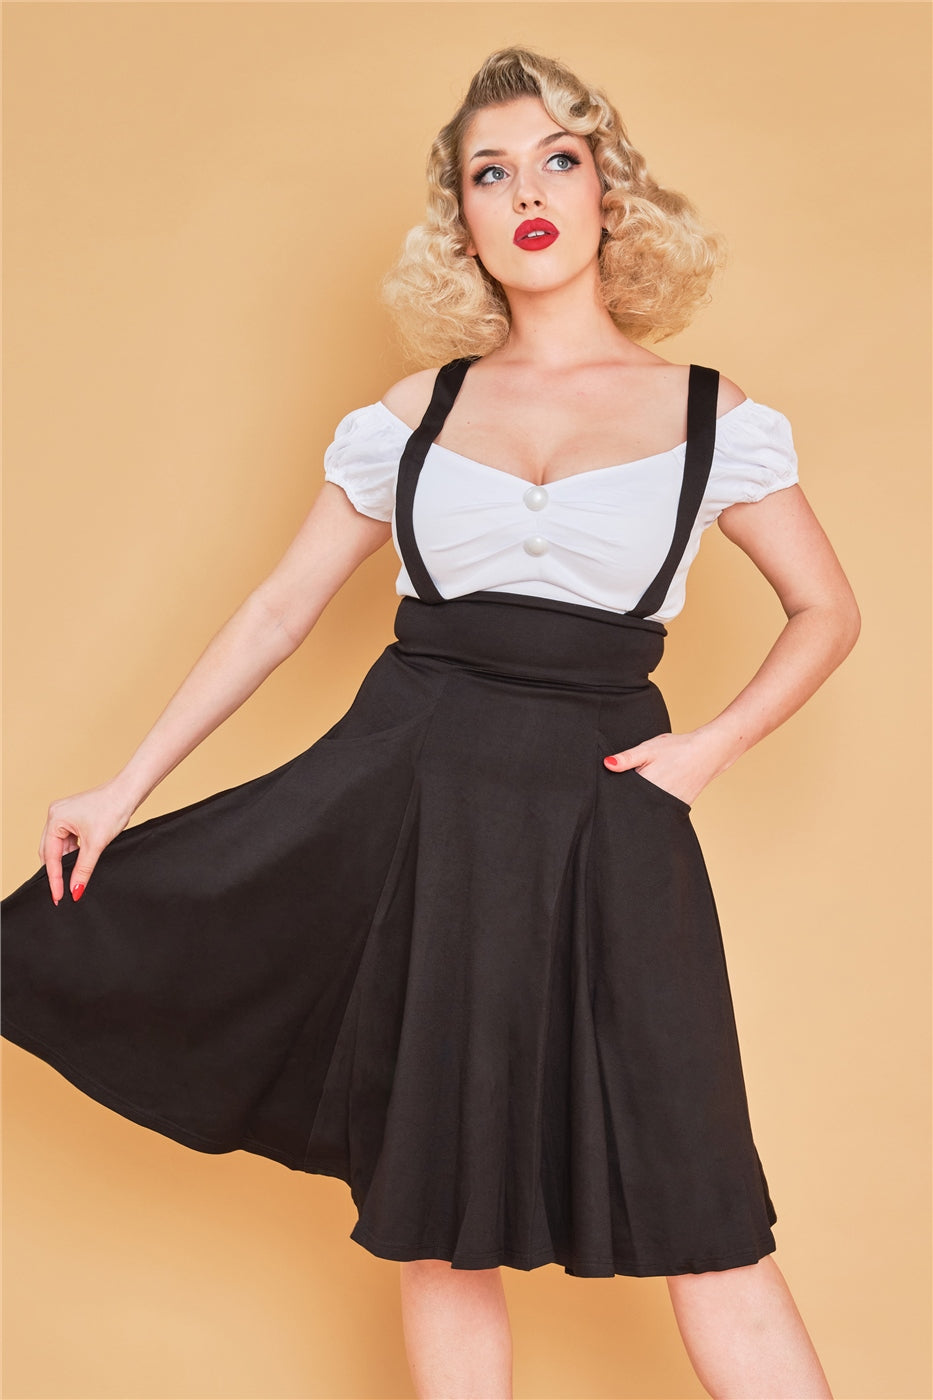 Elegant blonde woman standing against a yellow background wearing a black mid length swing skirt with braces and the white Dolores top 